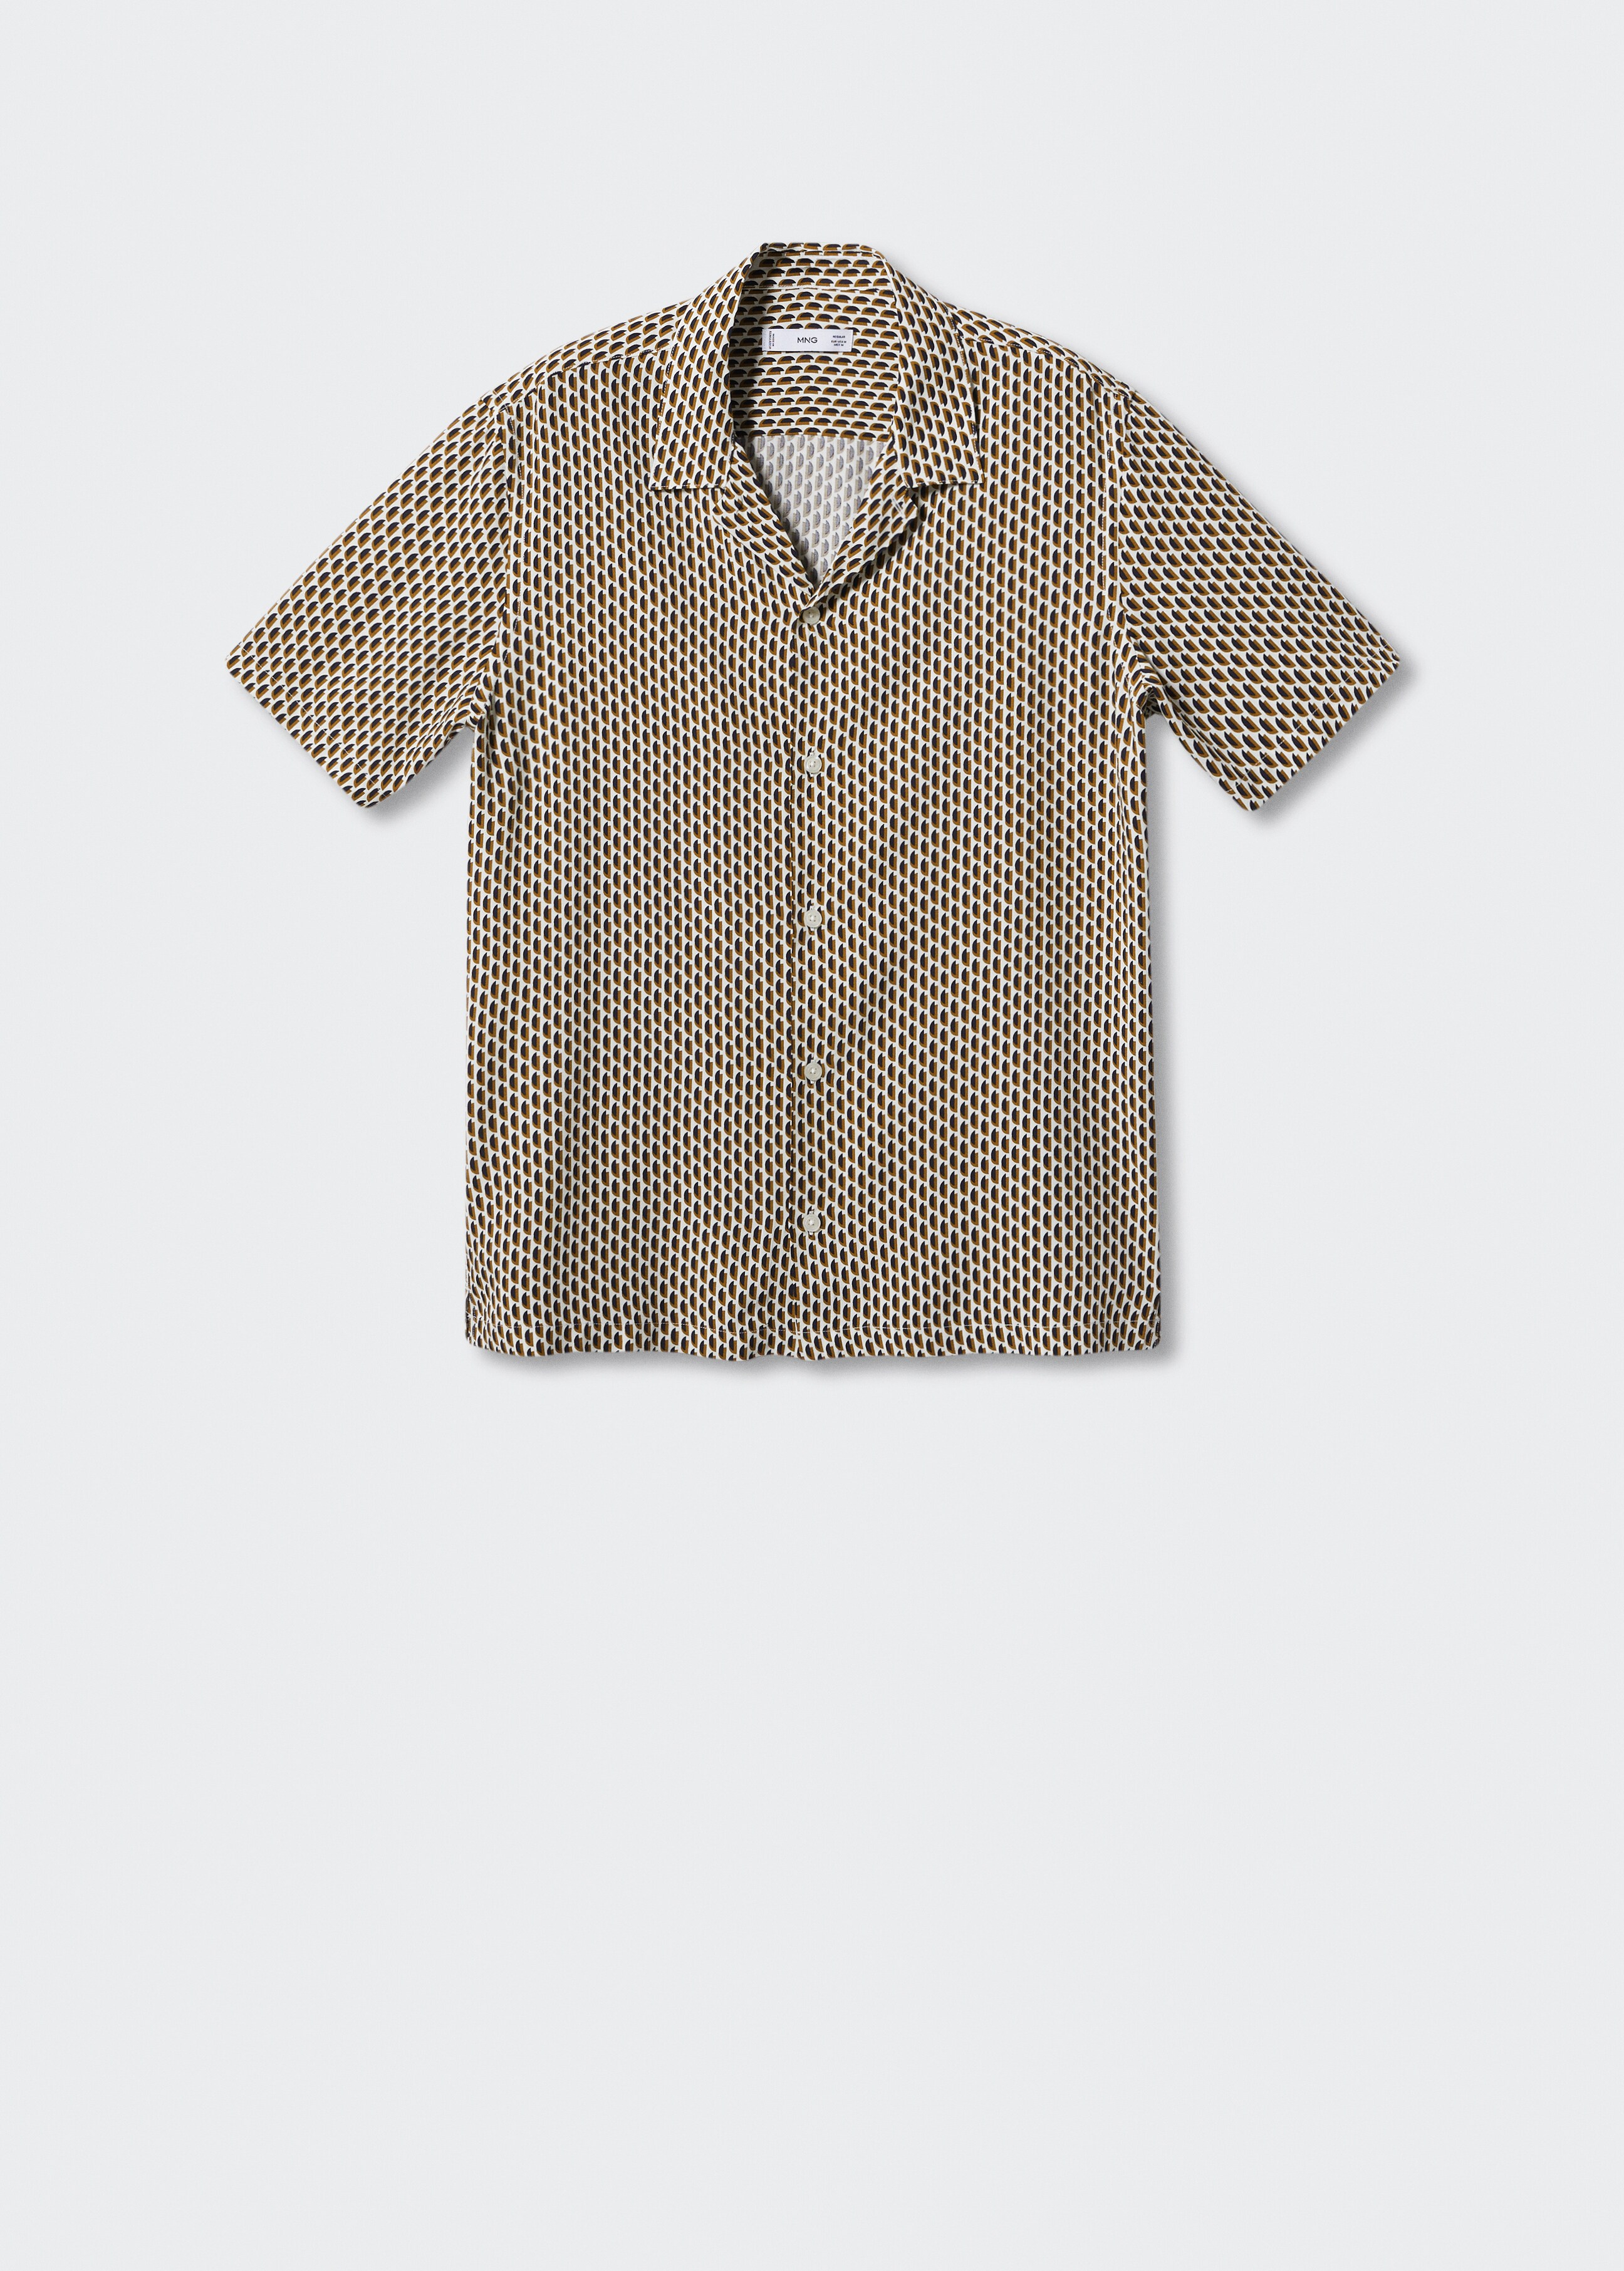 Printed short-sleeved shirt - Article without model